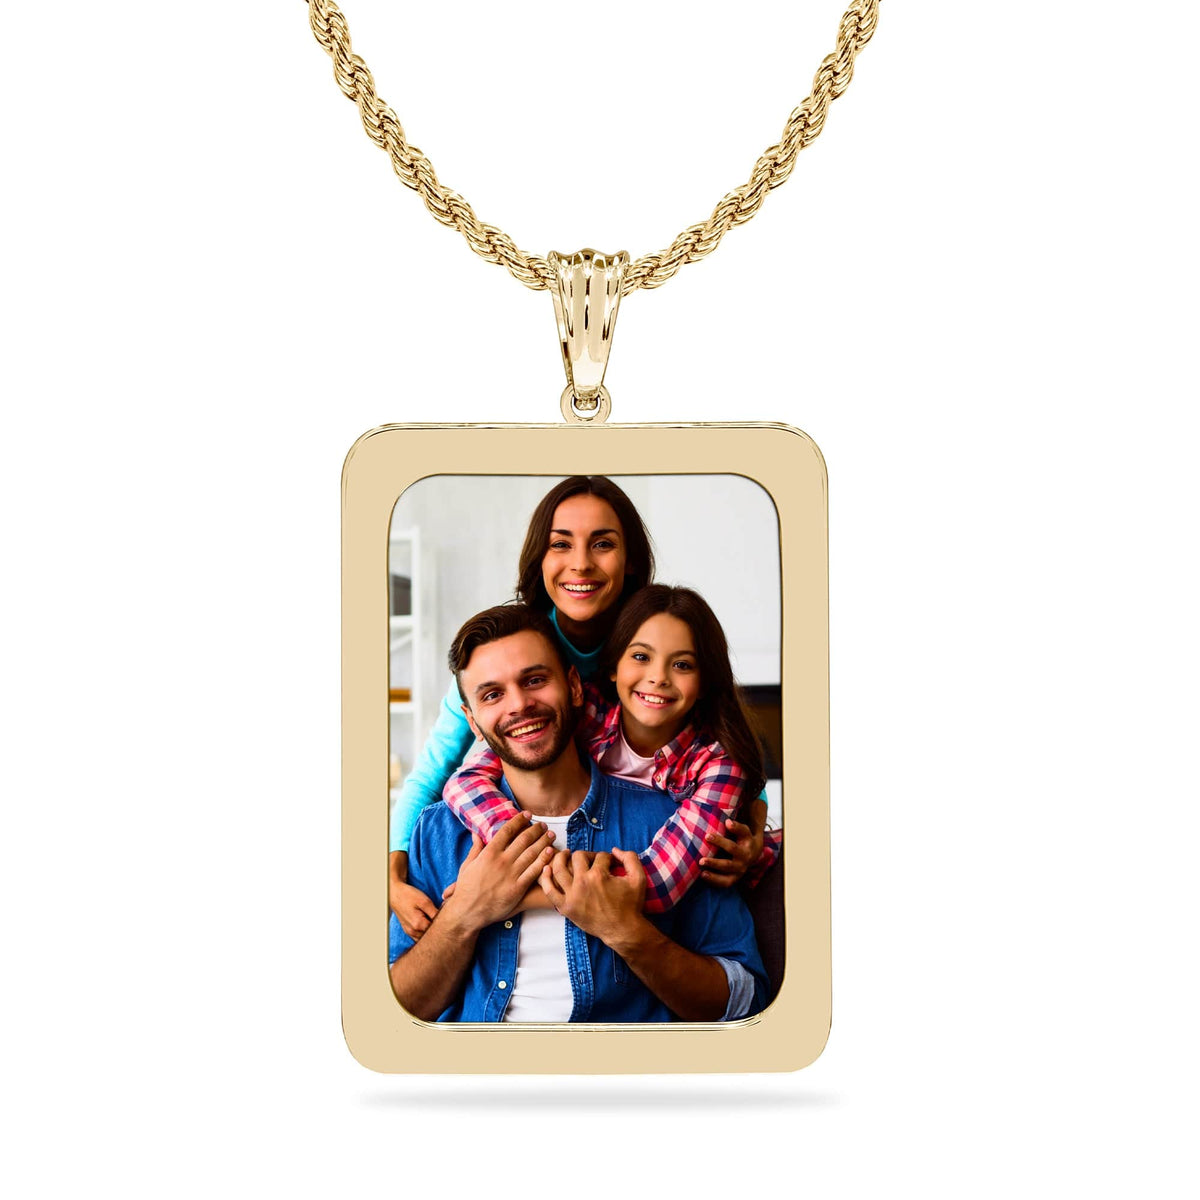 Gold Tone Stainless Steel / Rope Chain High Polished Rectangle Photo Pendant